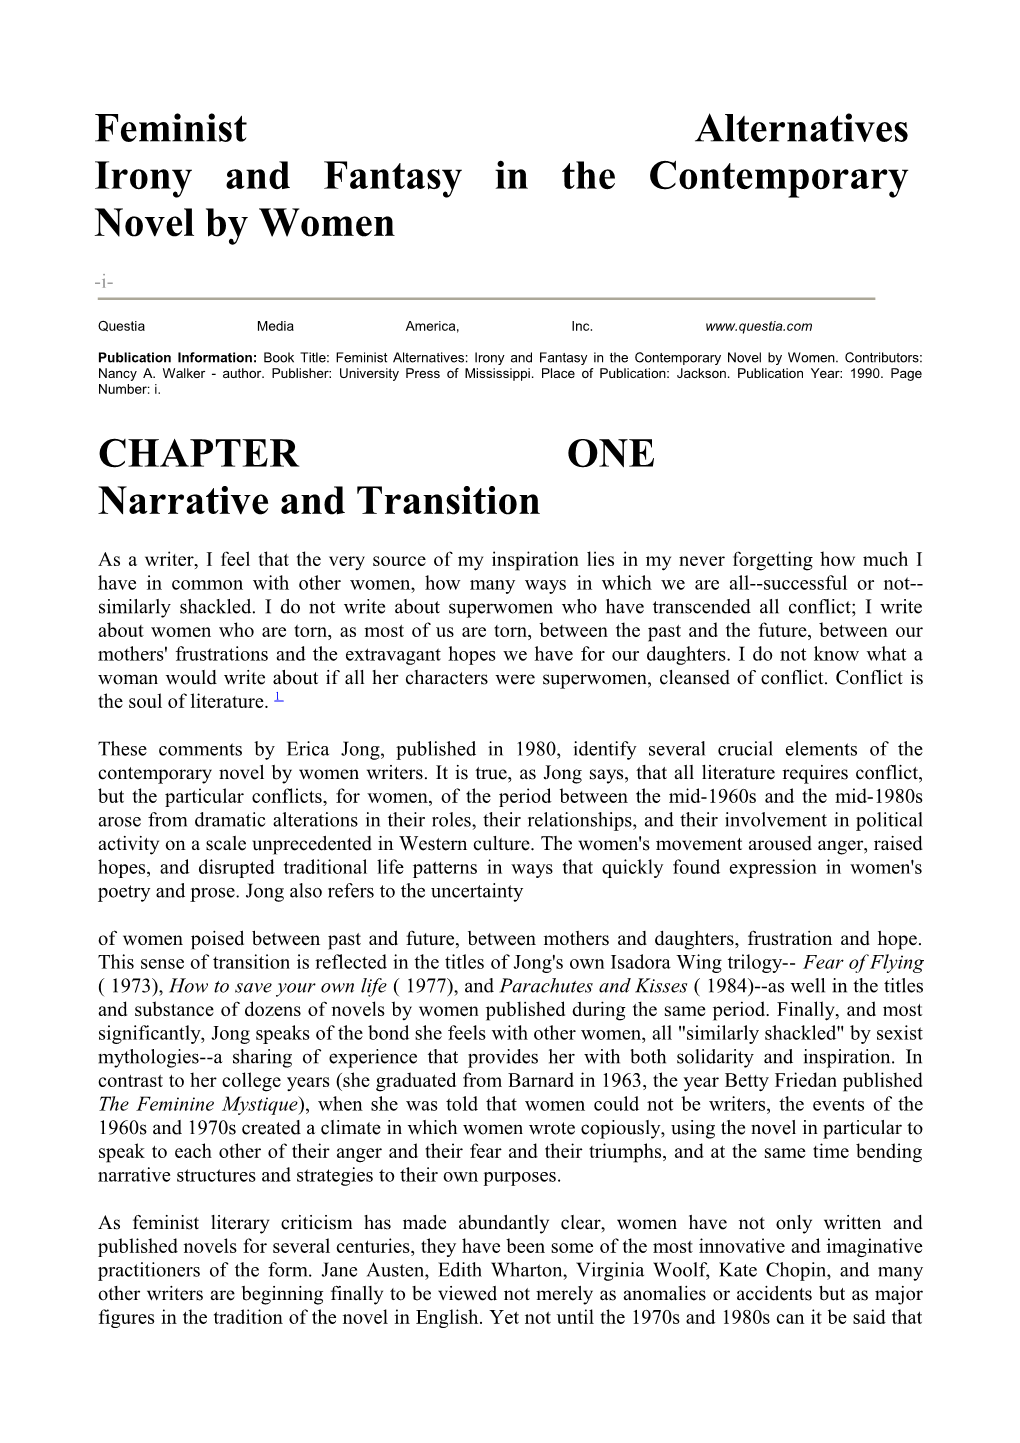 CHAPTER ONE Narrative and Transition